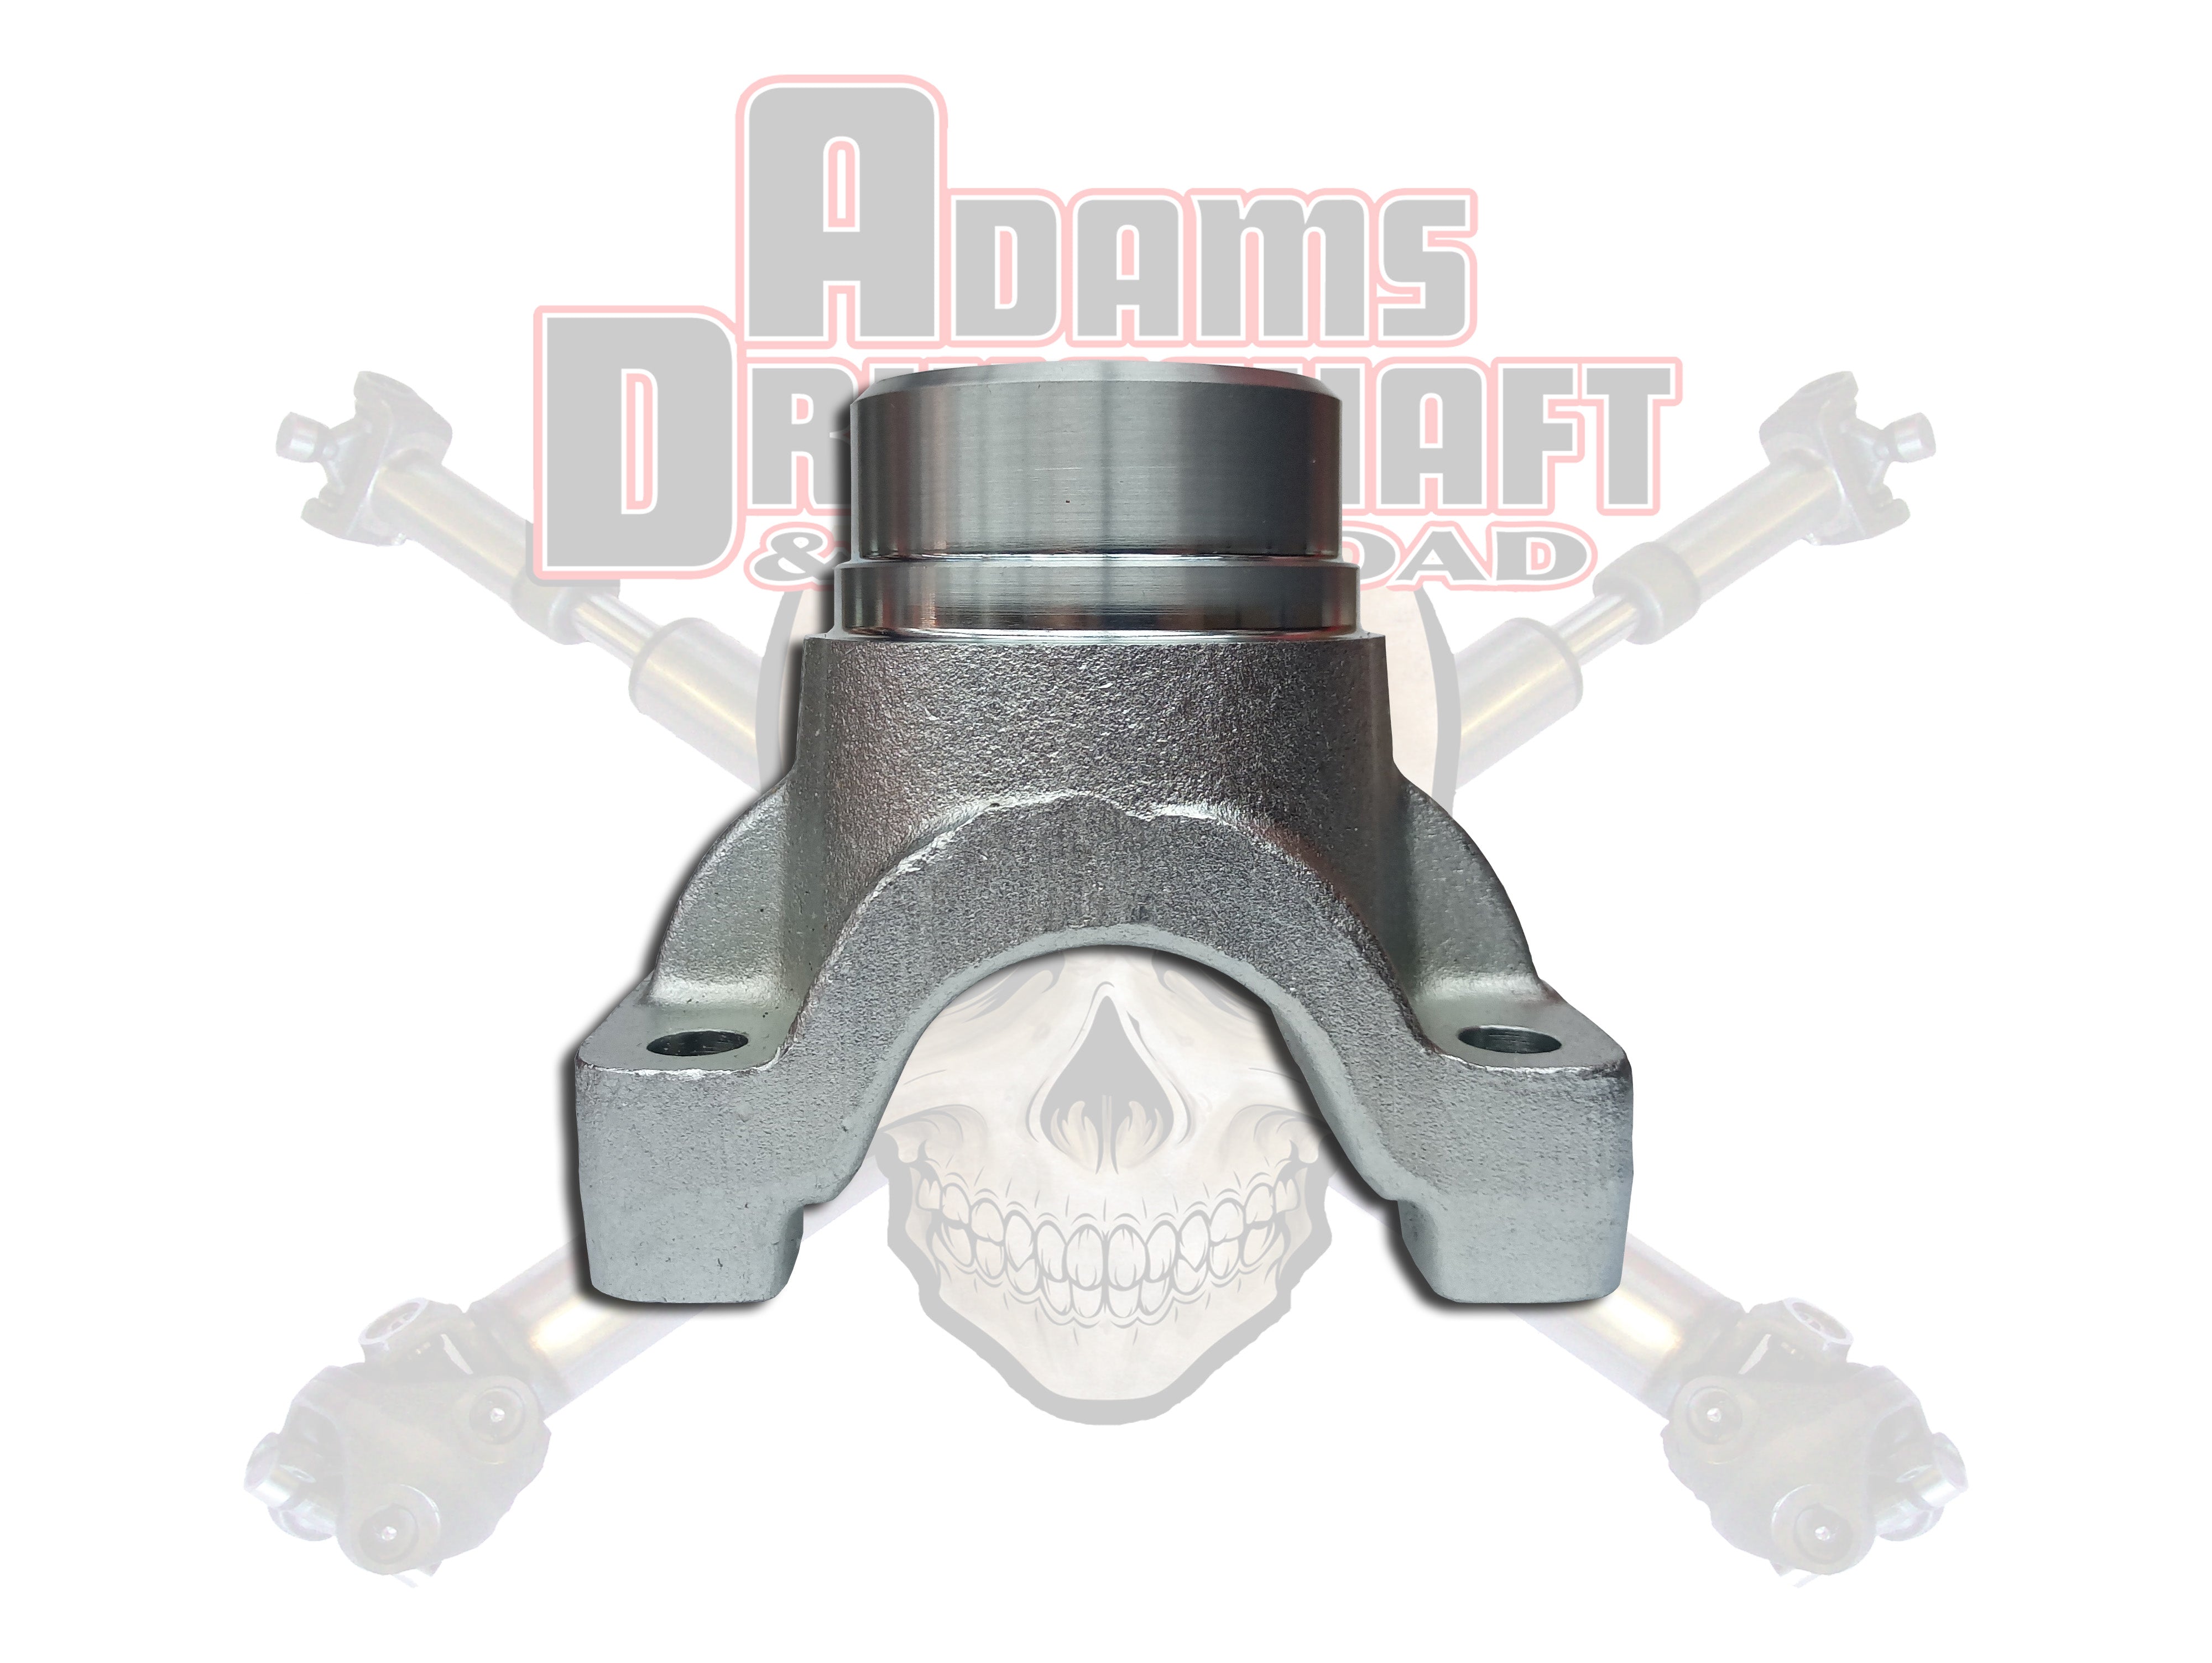 Adams Forged Jeep JT Sahara Rear 1350 Series Pinion Yoke U-Bolt Style with an M220 Differential.